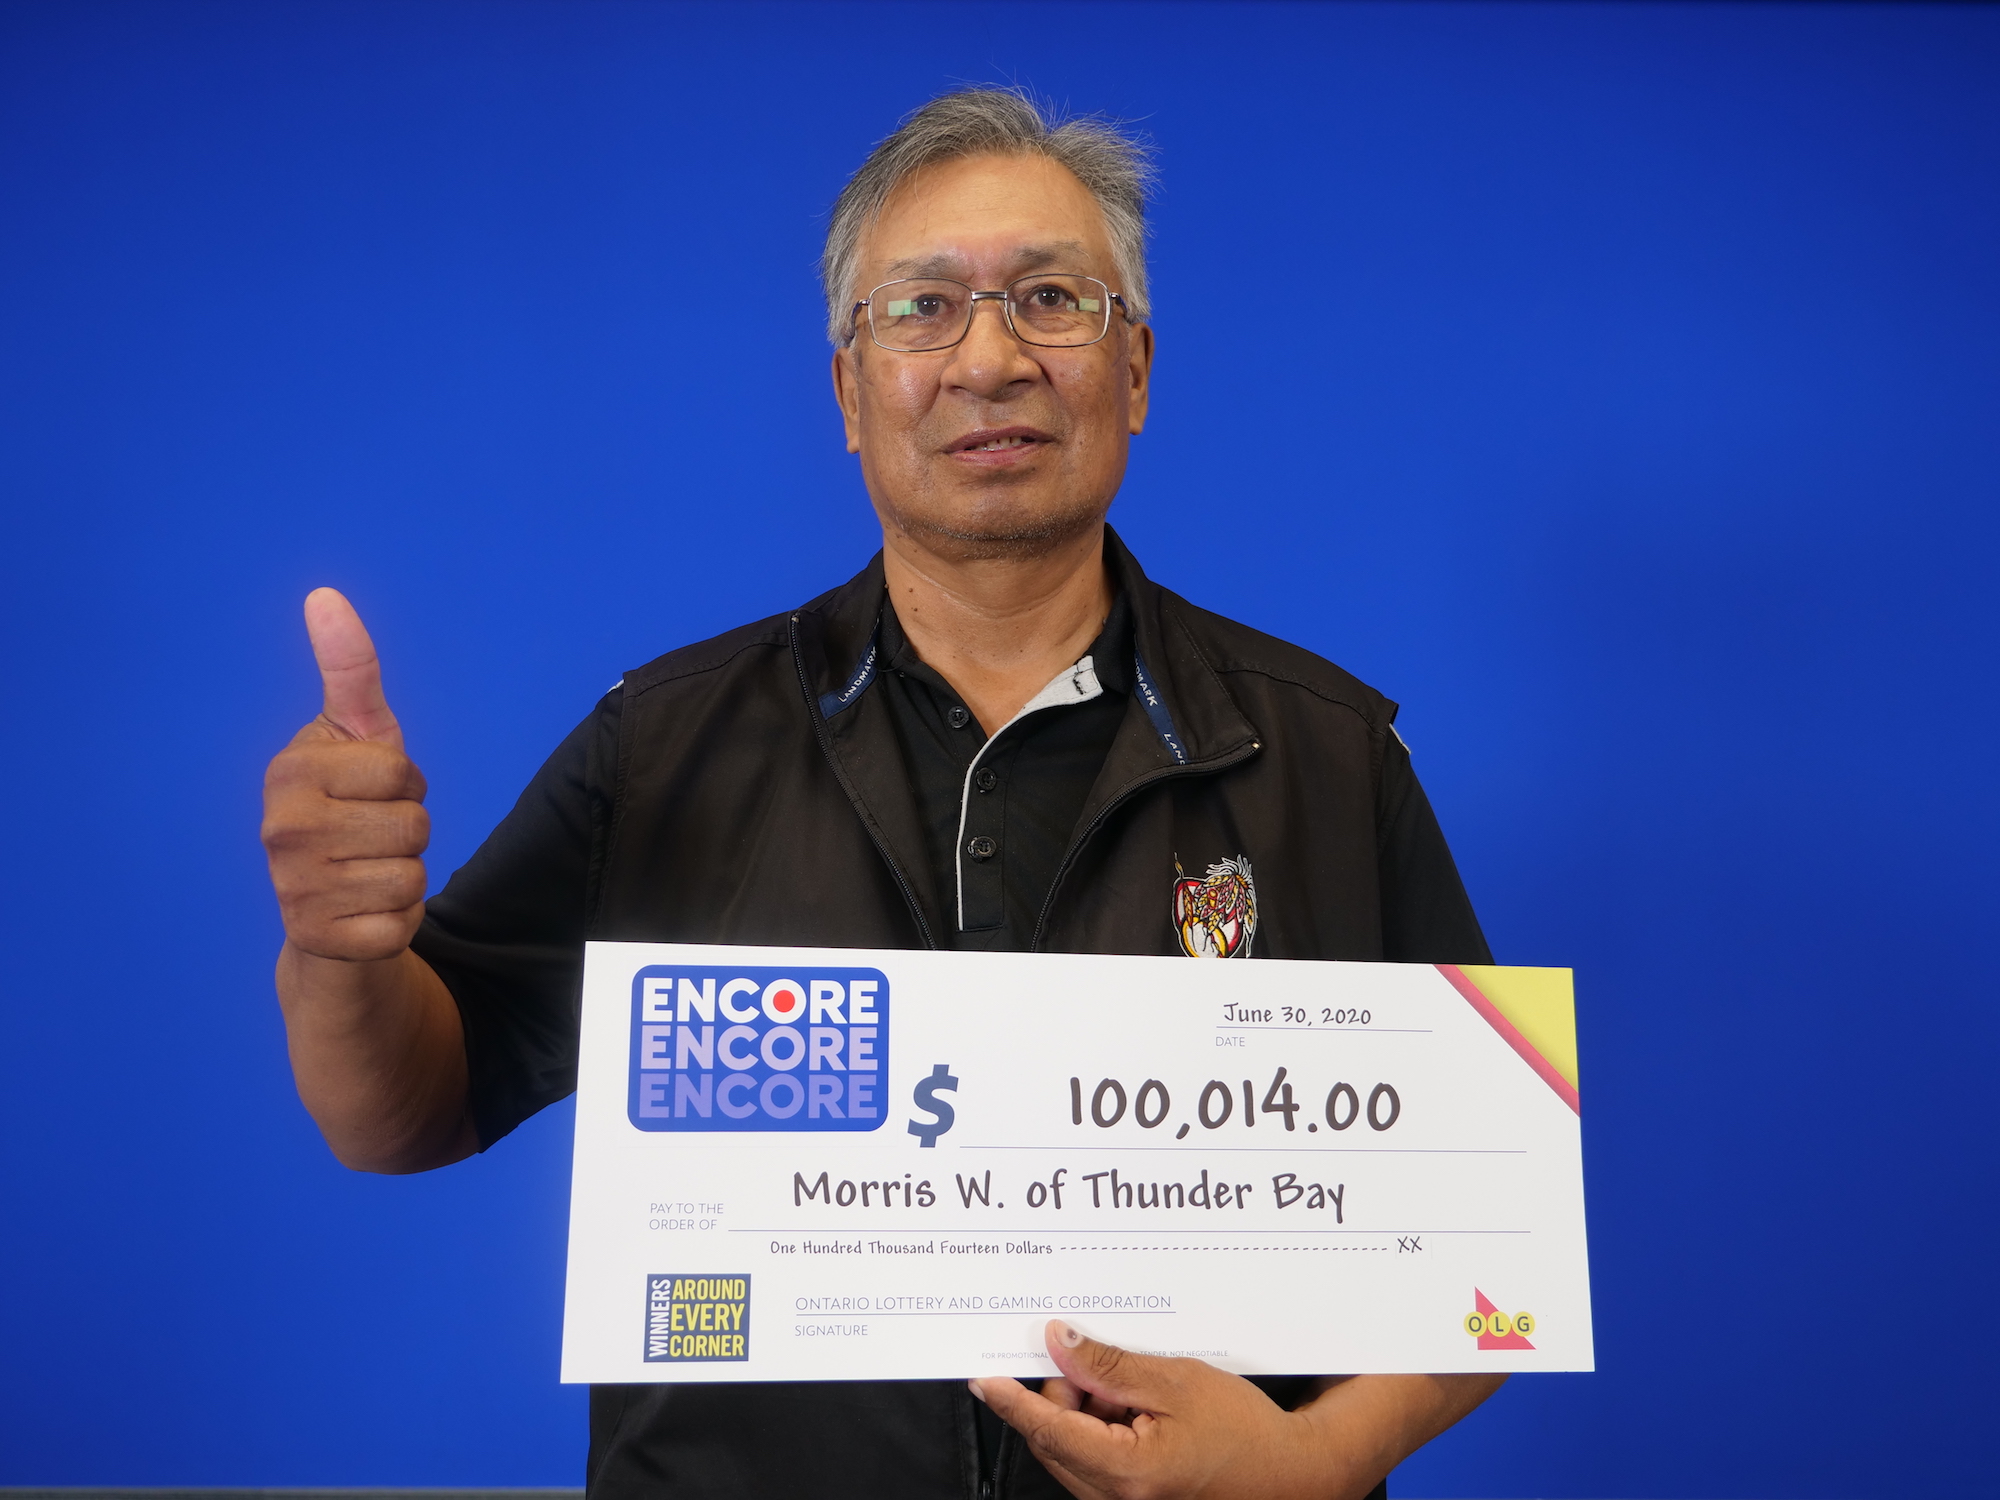 lotto 649 encore numbers